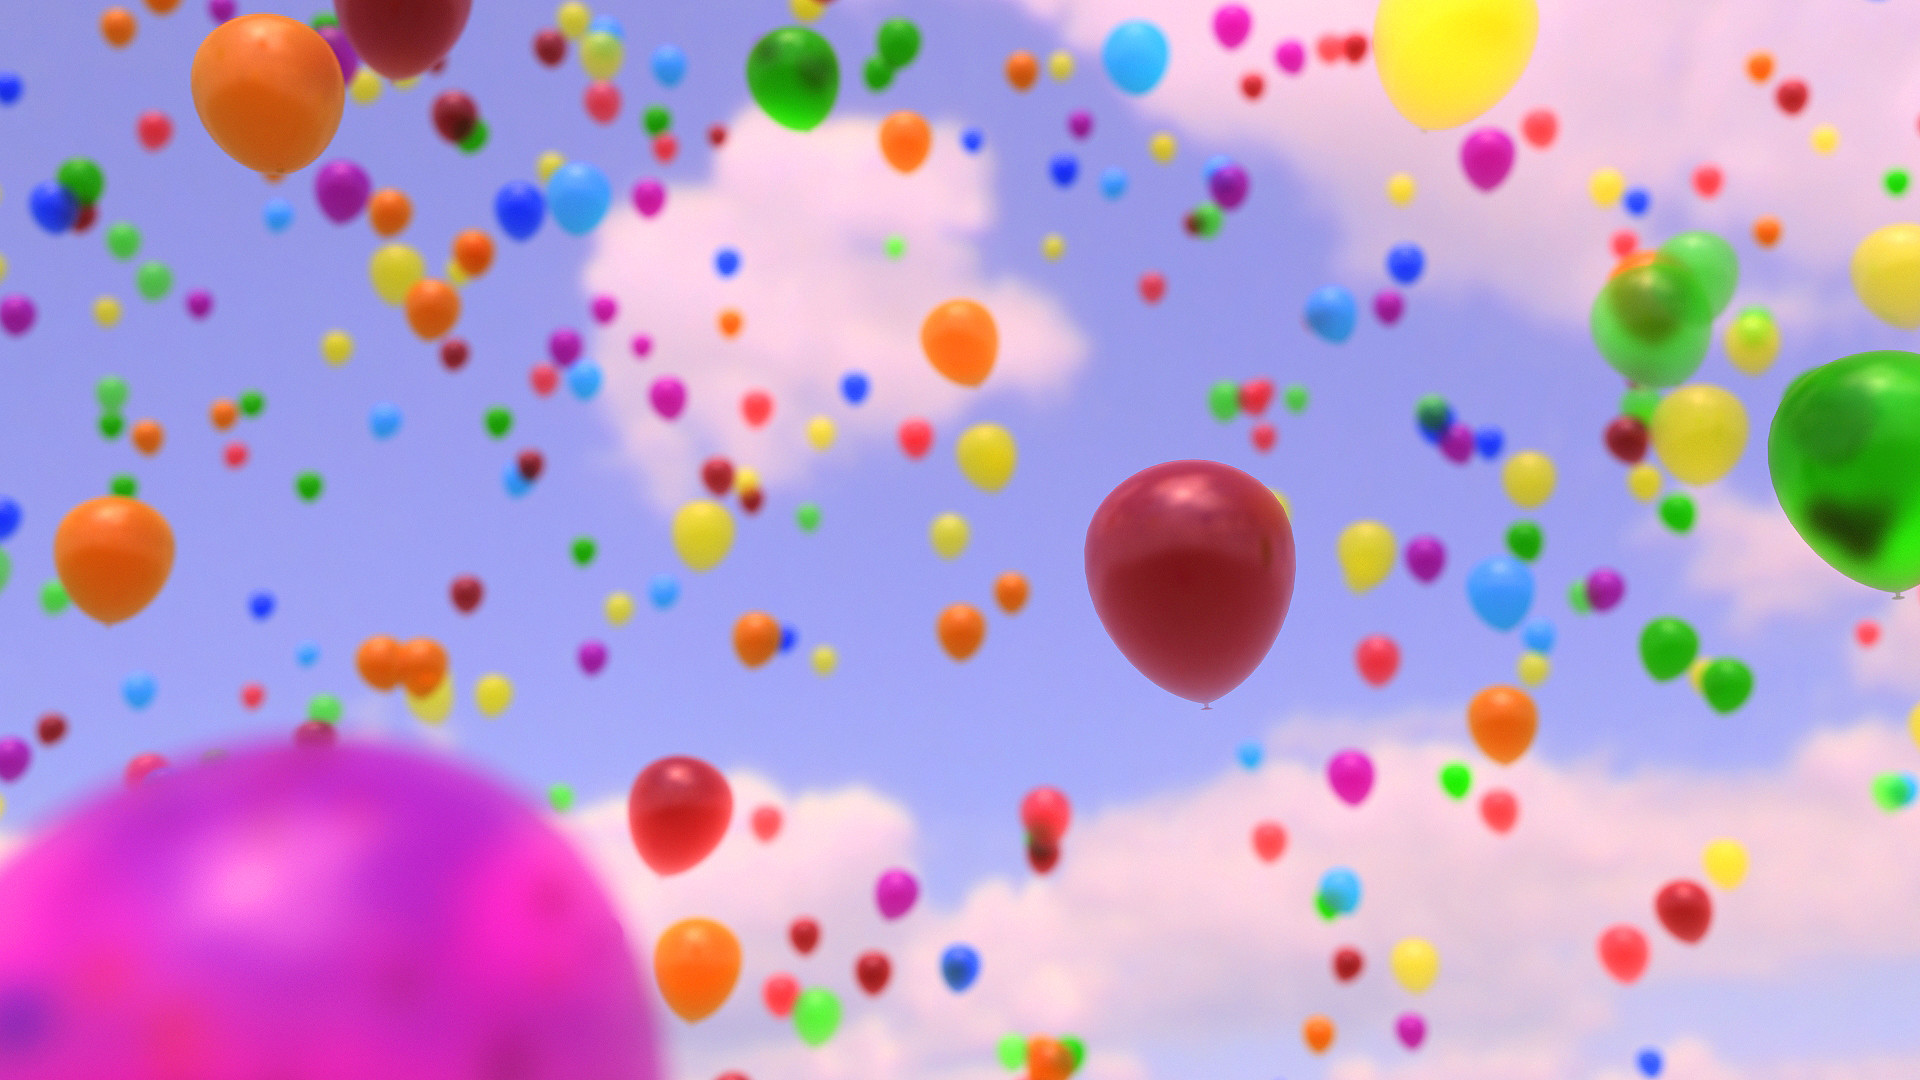 Balloons Wallpapers